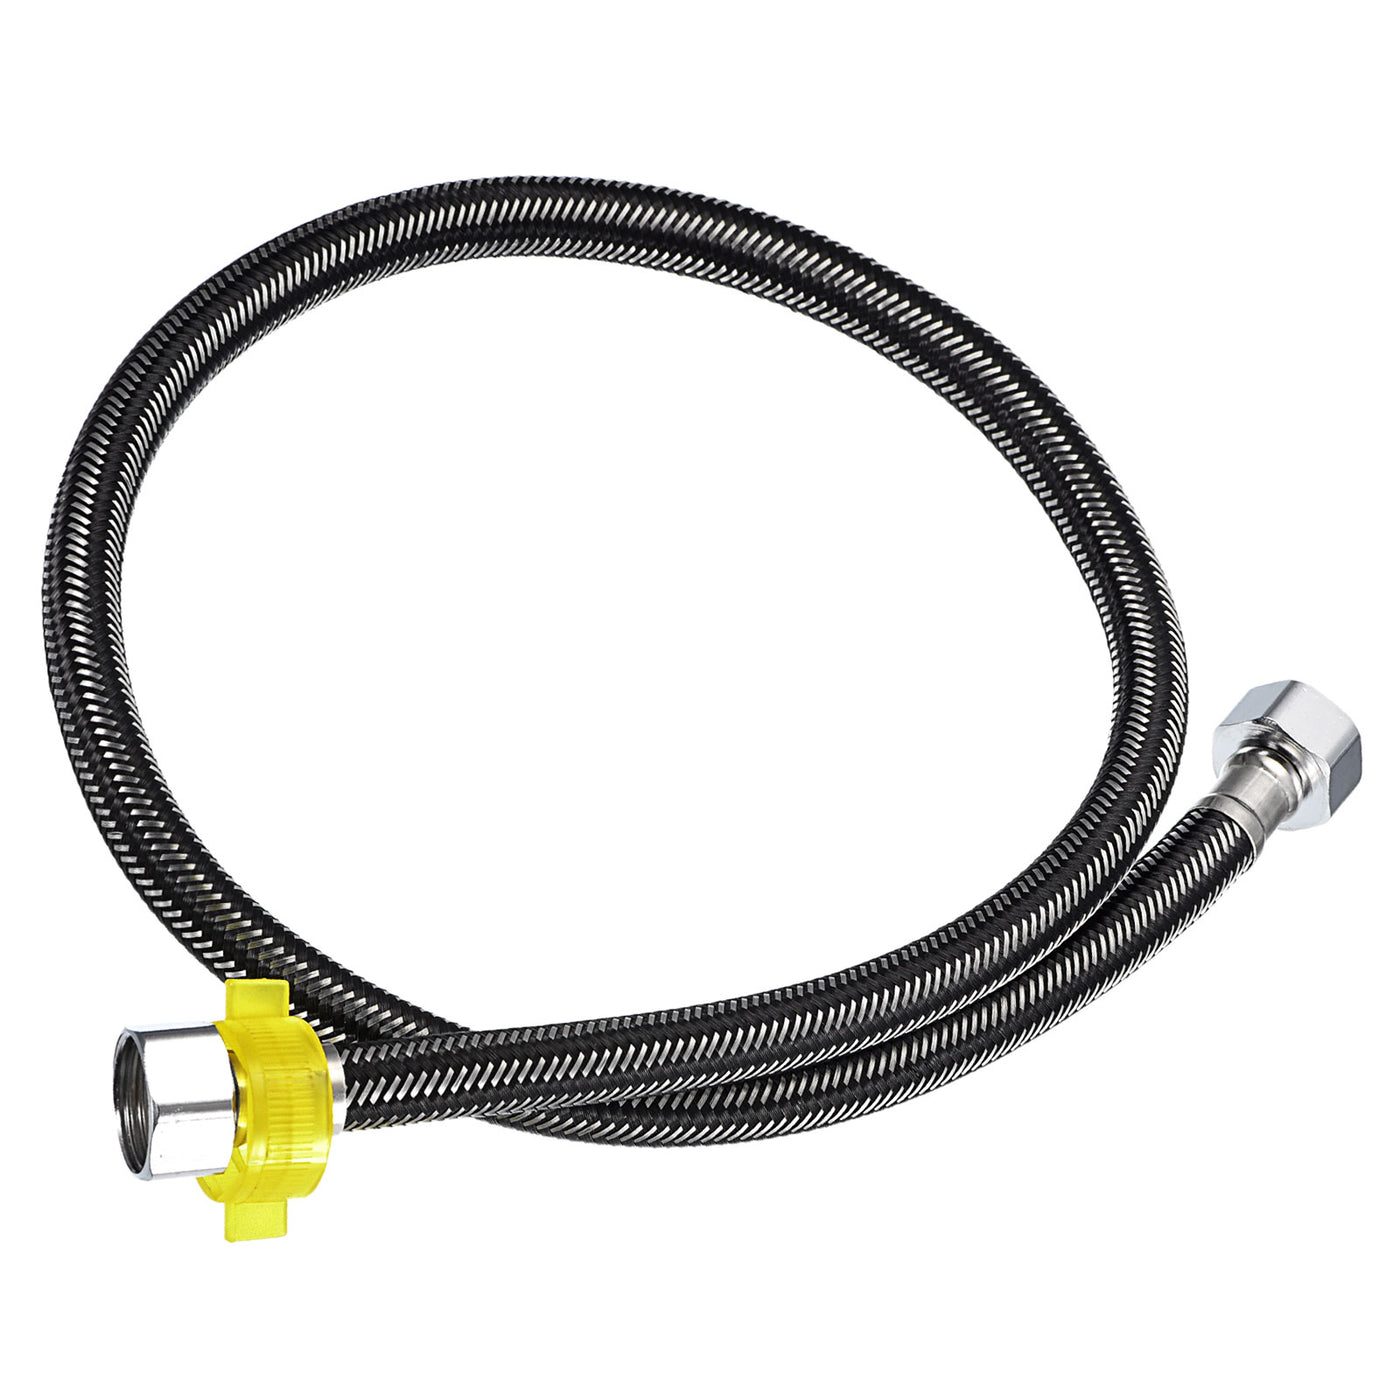 uxcell Uxcell Faucet Supply Line Connector, G1/2 Female x G1/2 Female 31" Hose, Black